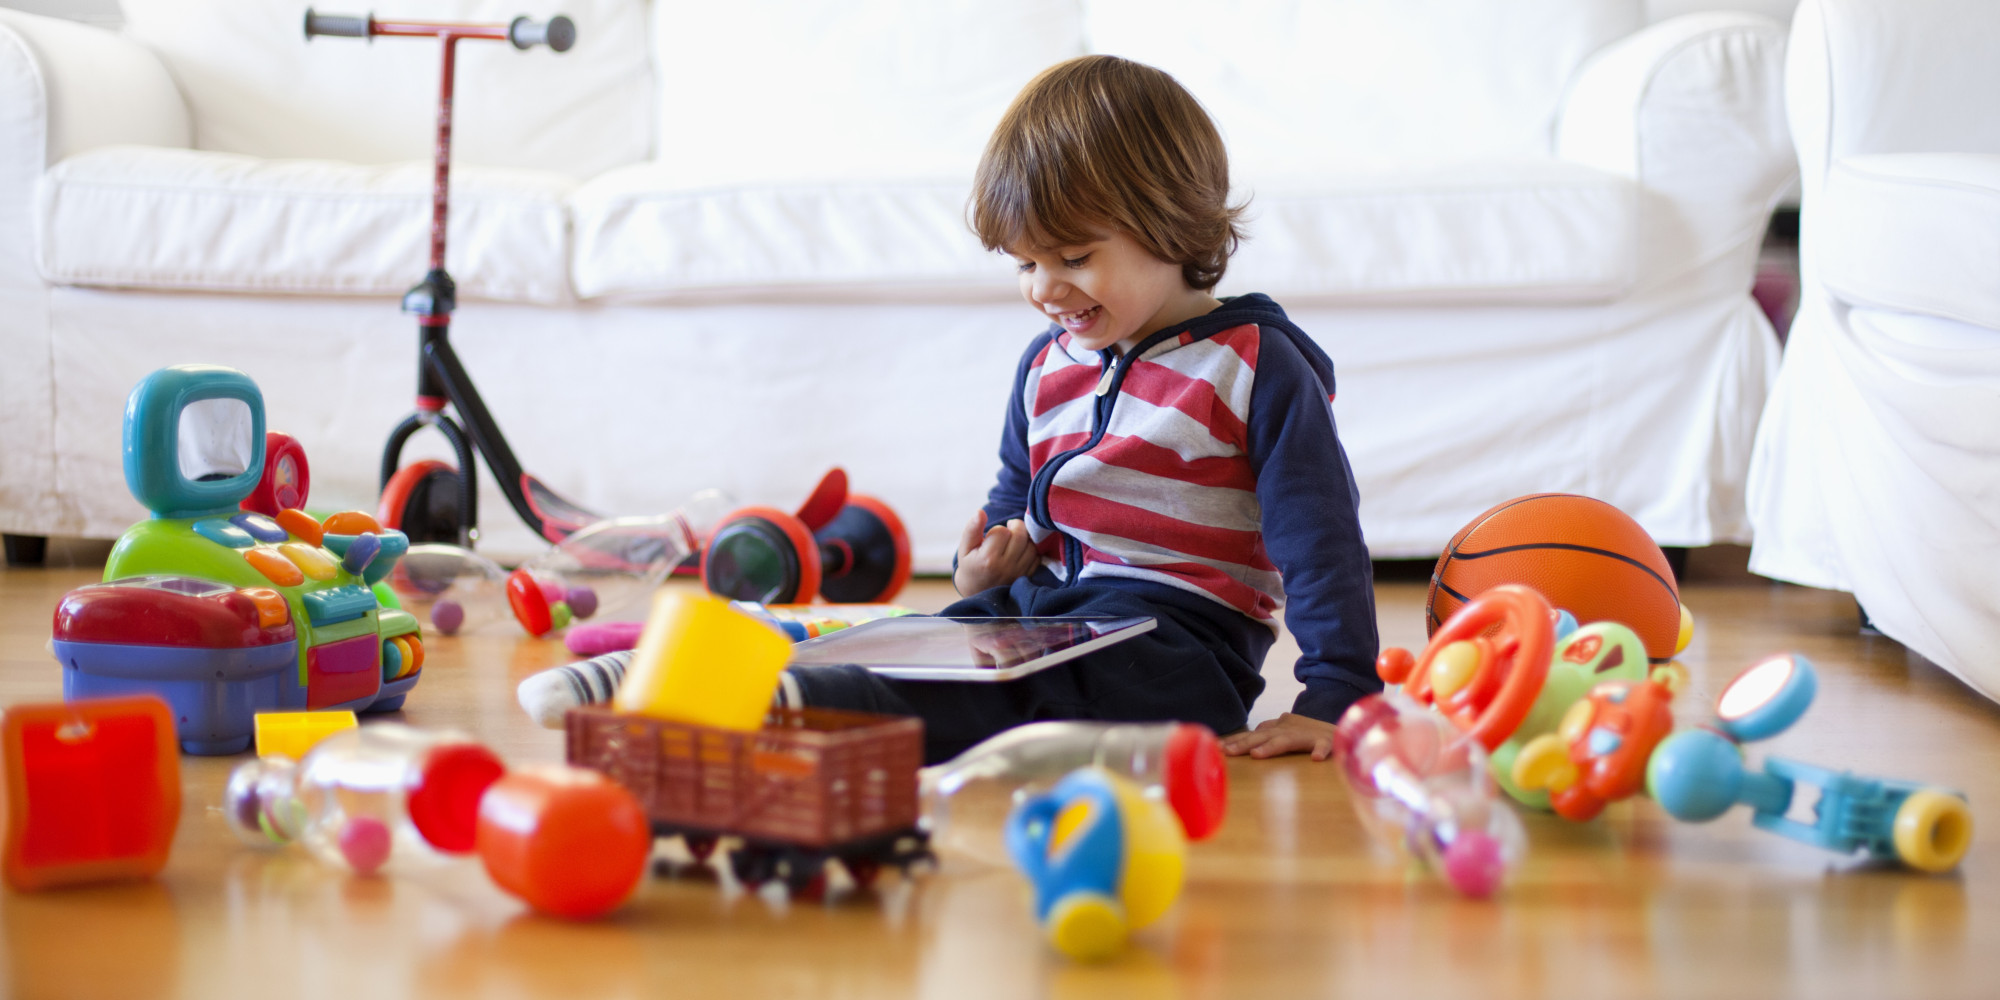 Top 5 Ways to Ensure Safe, Natural Toys for Kids | HuffPost